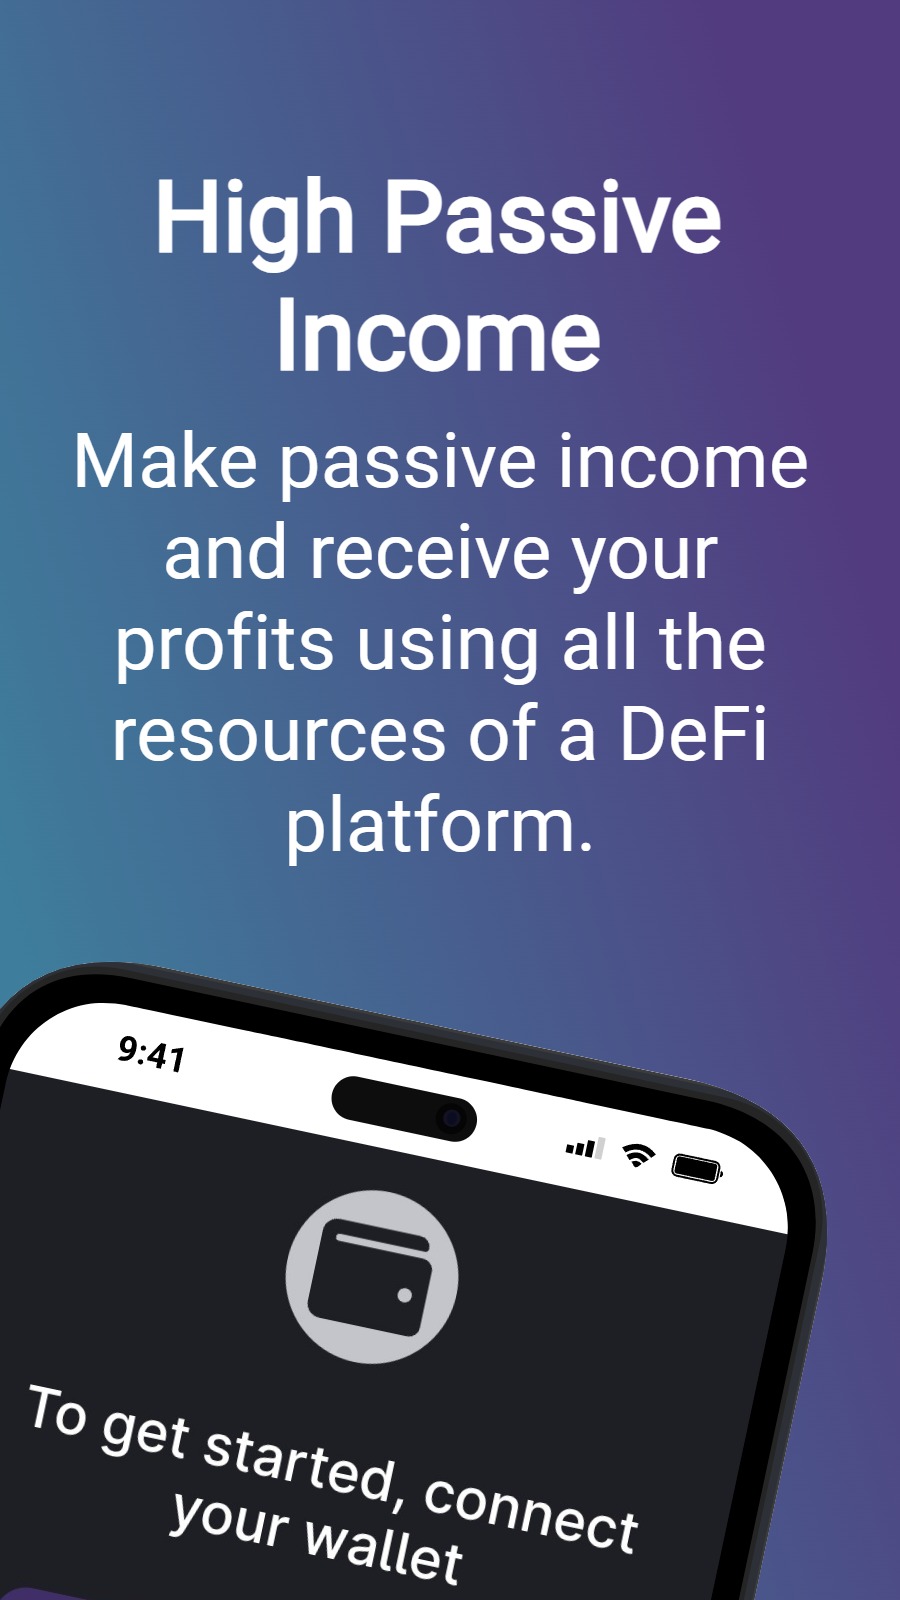 High Passive Income - Make passive income and receive your profits using all the resources of a DeFi platform.